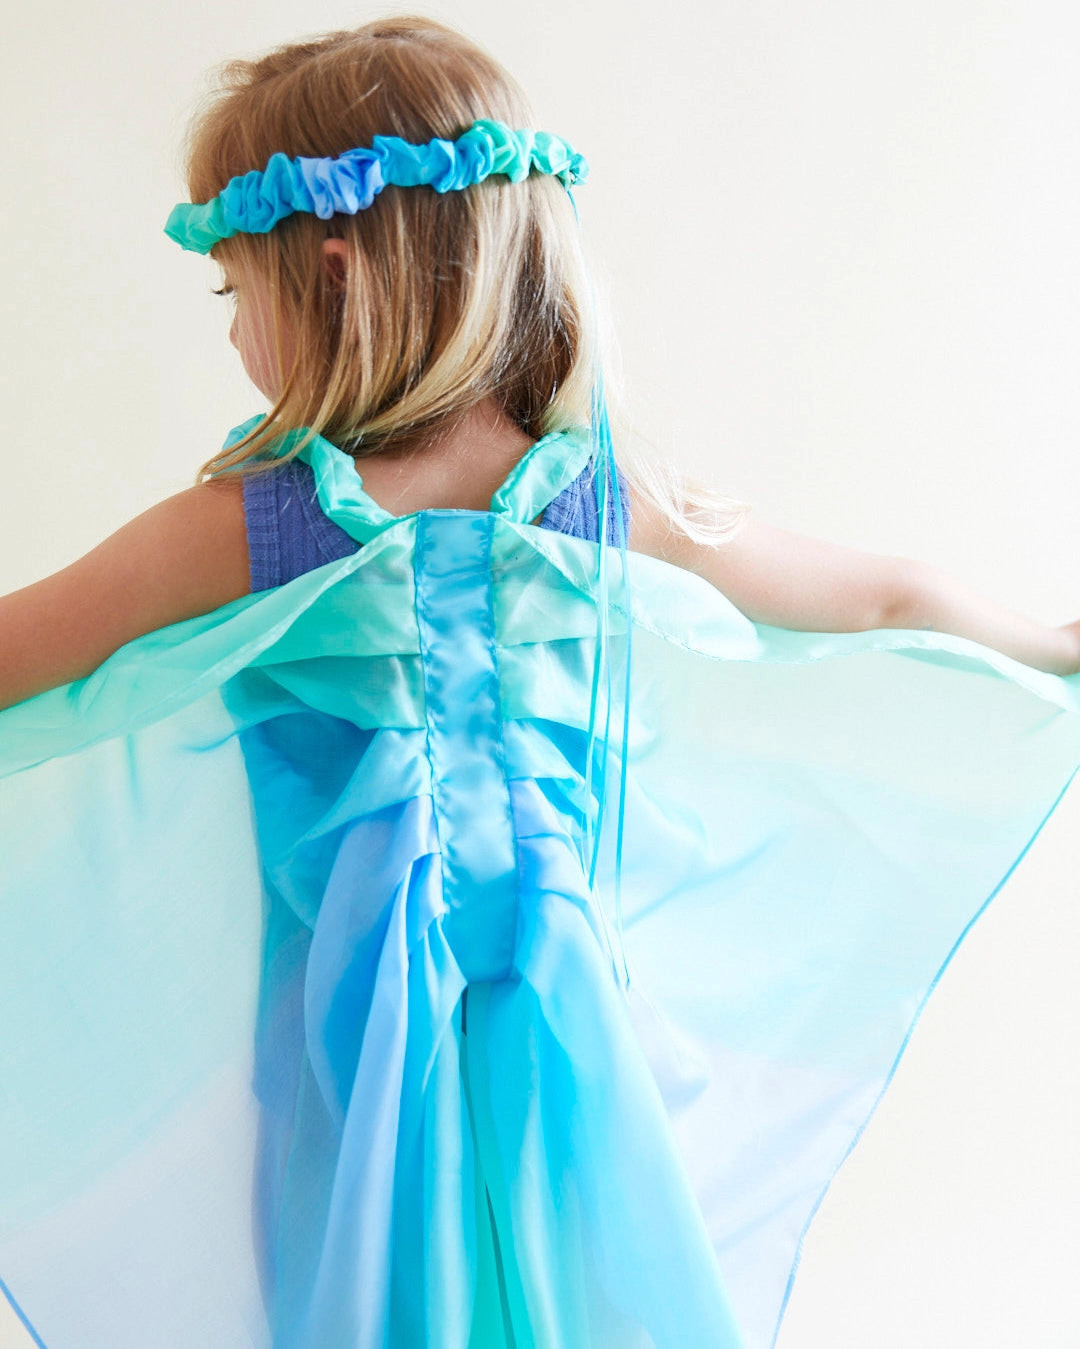 Sea Fairy Wings - 100% Silk Dress-Up For Pretend Play